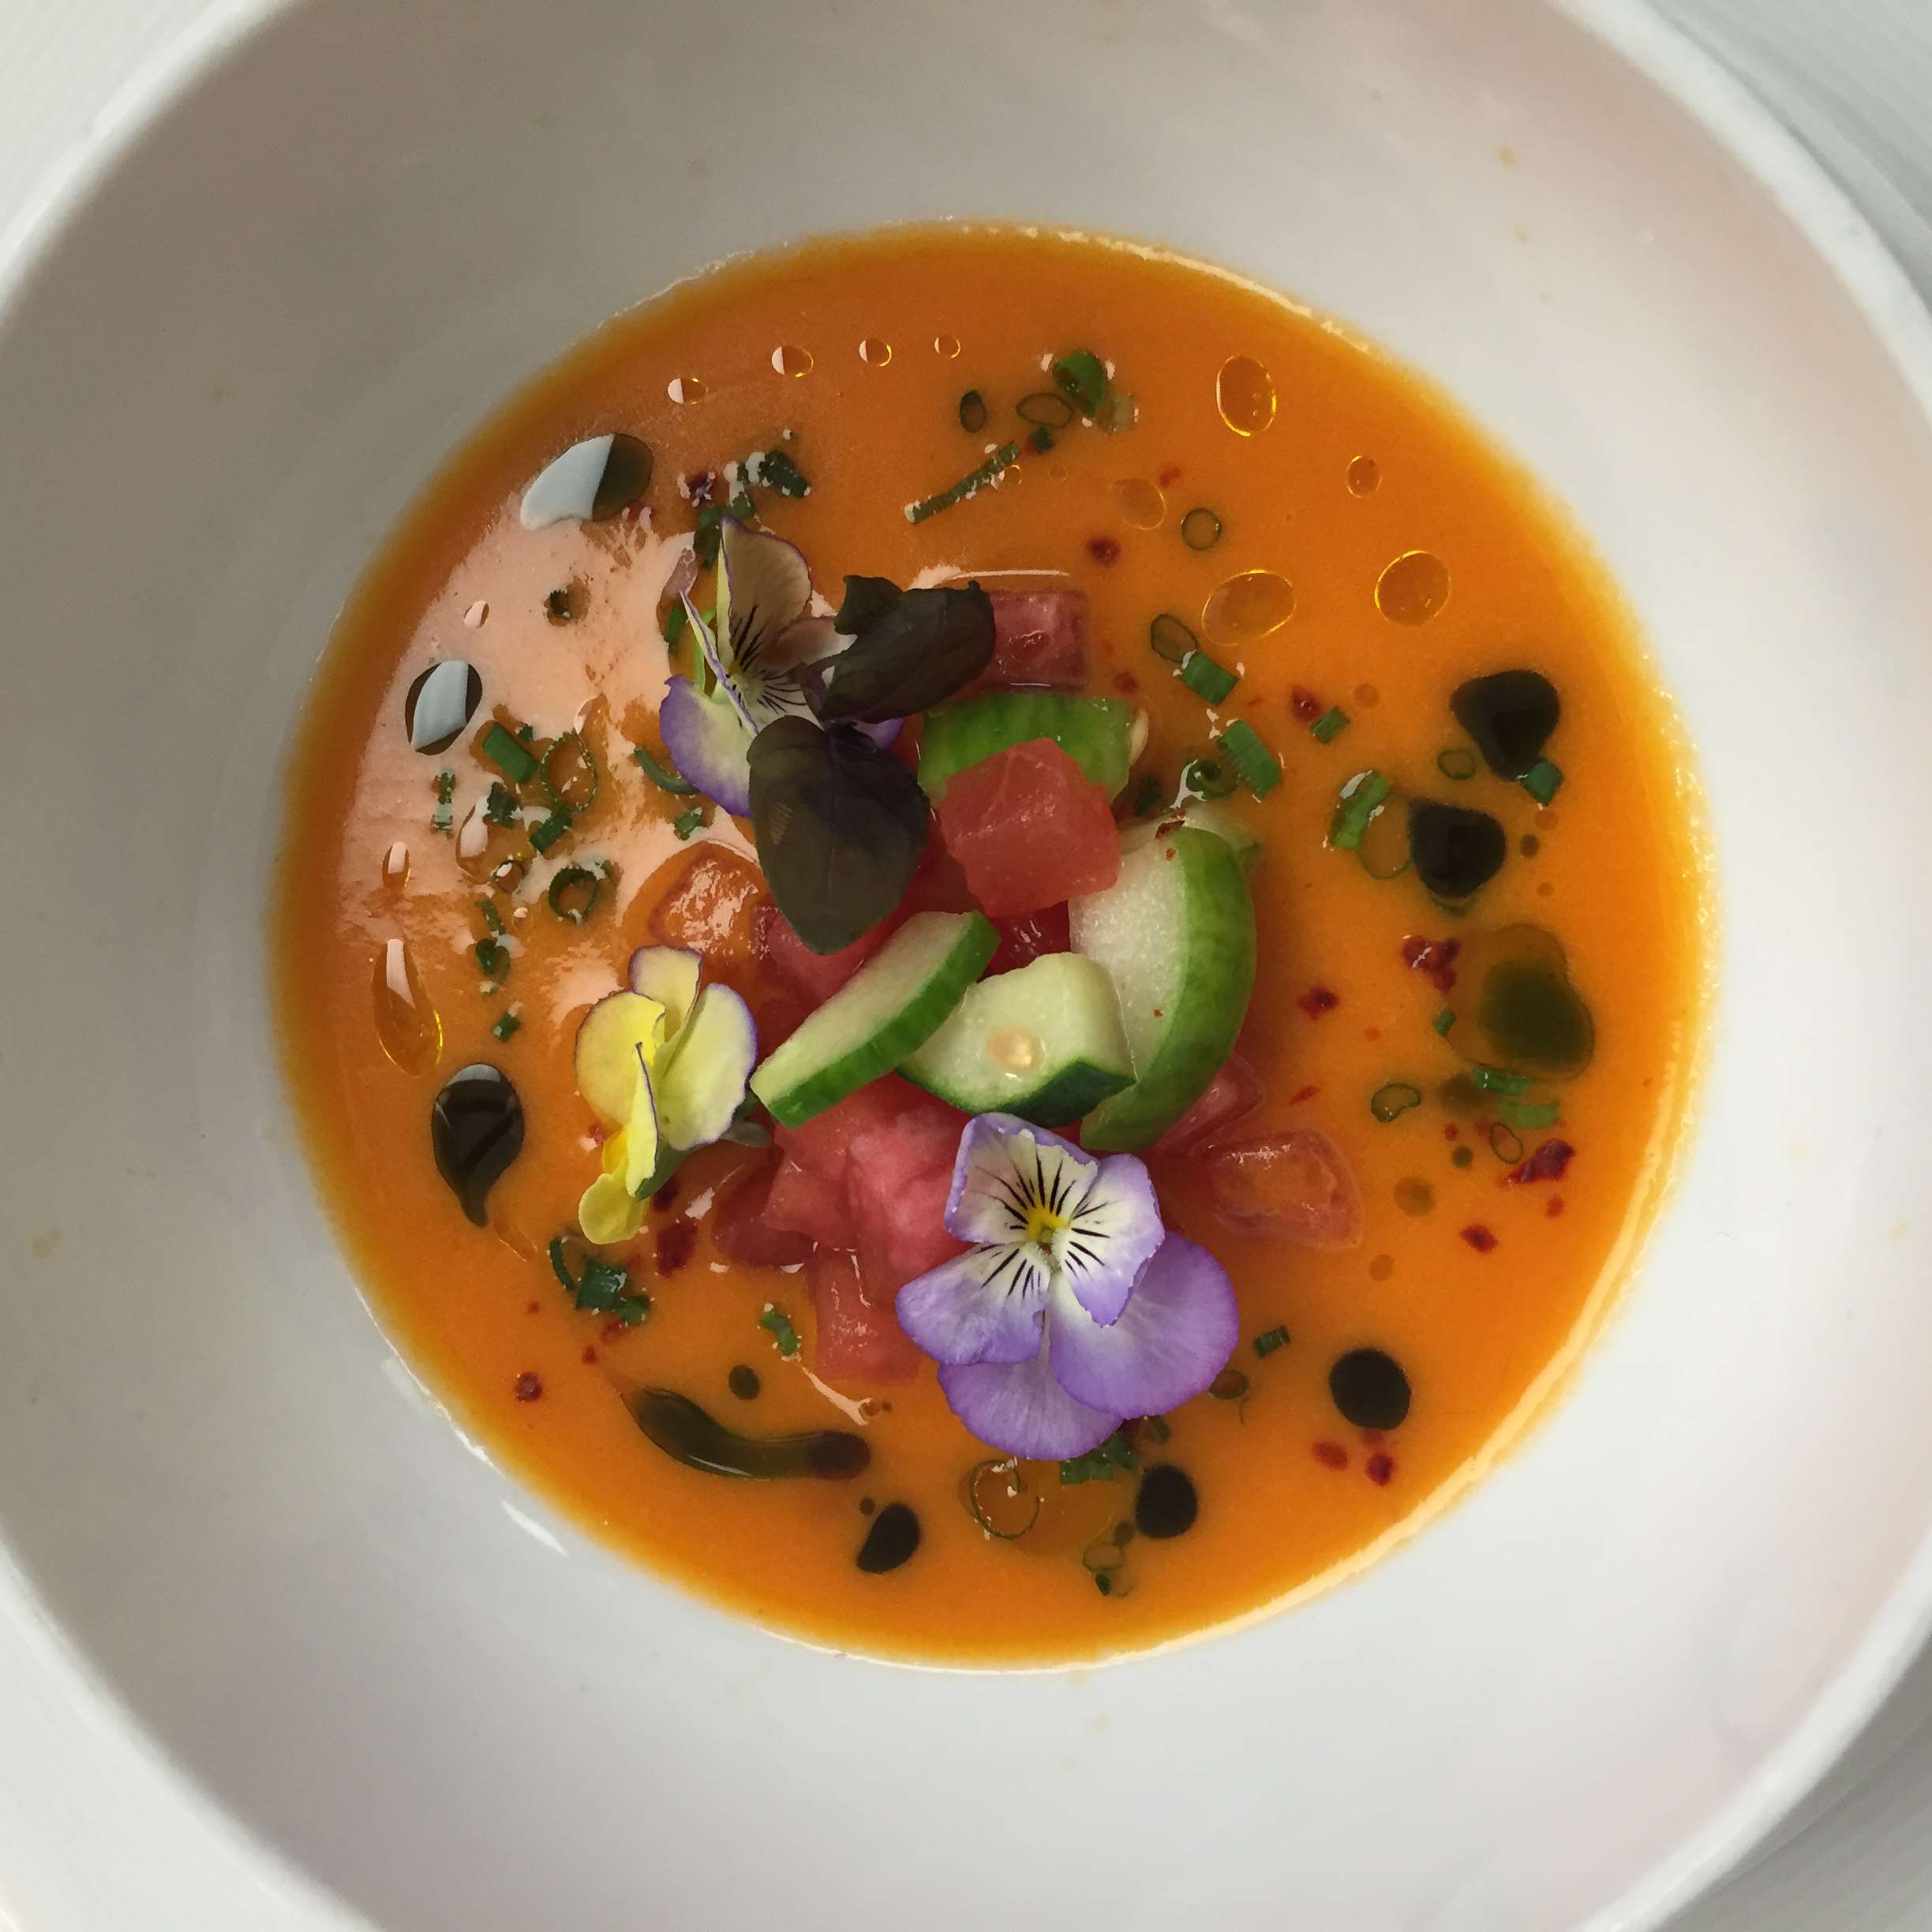 Tomato and Cherry Gazpacho with Cucumbers, Peppers and Sourdough Croutons - Gramercy Tavern NYC